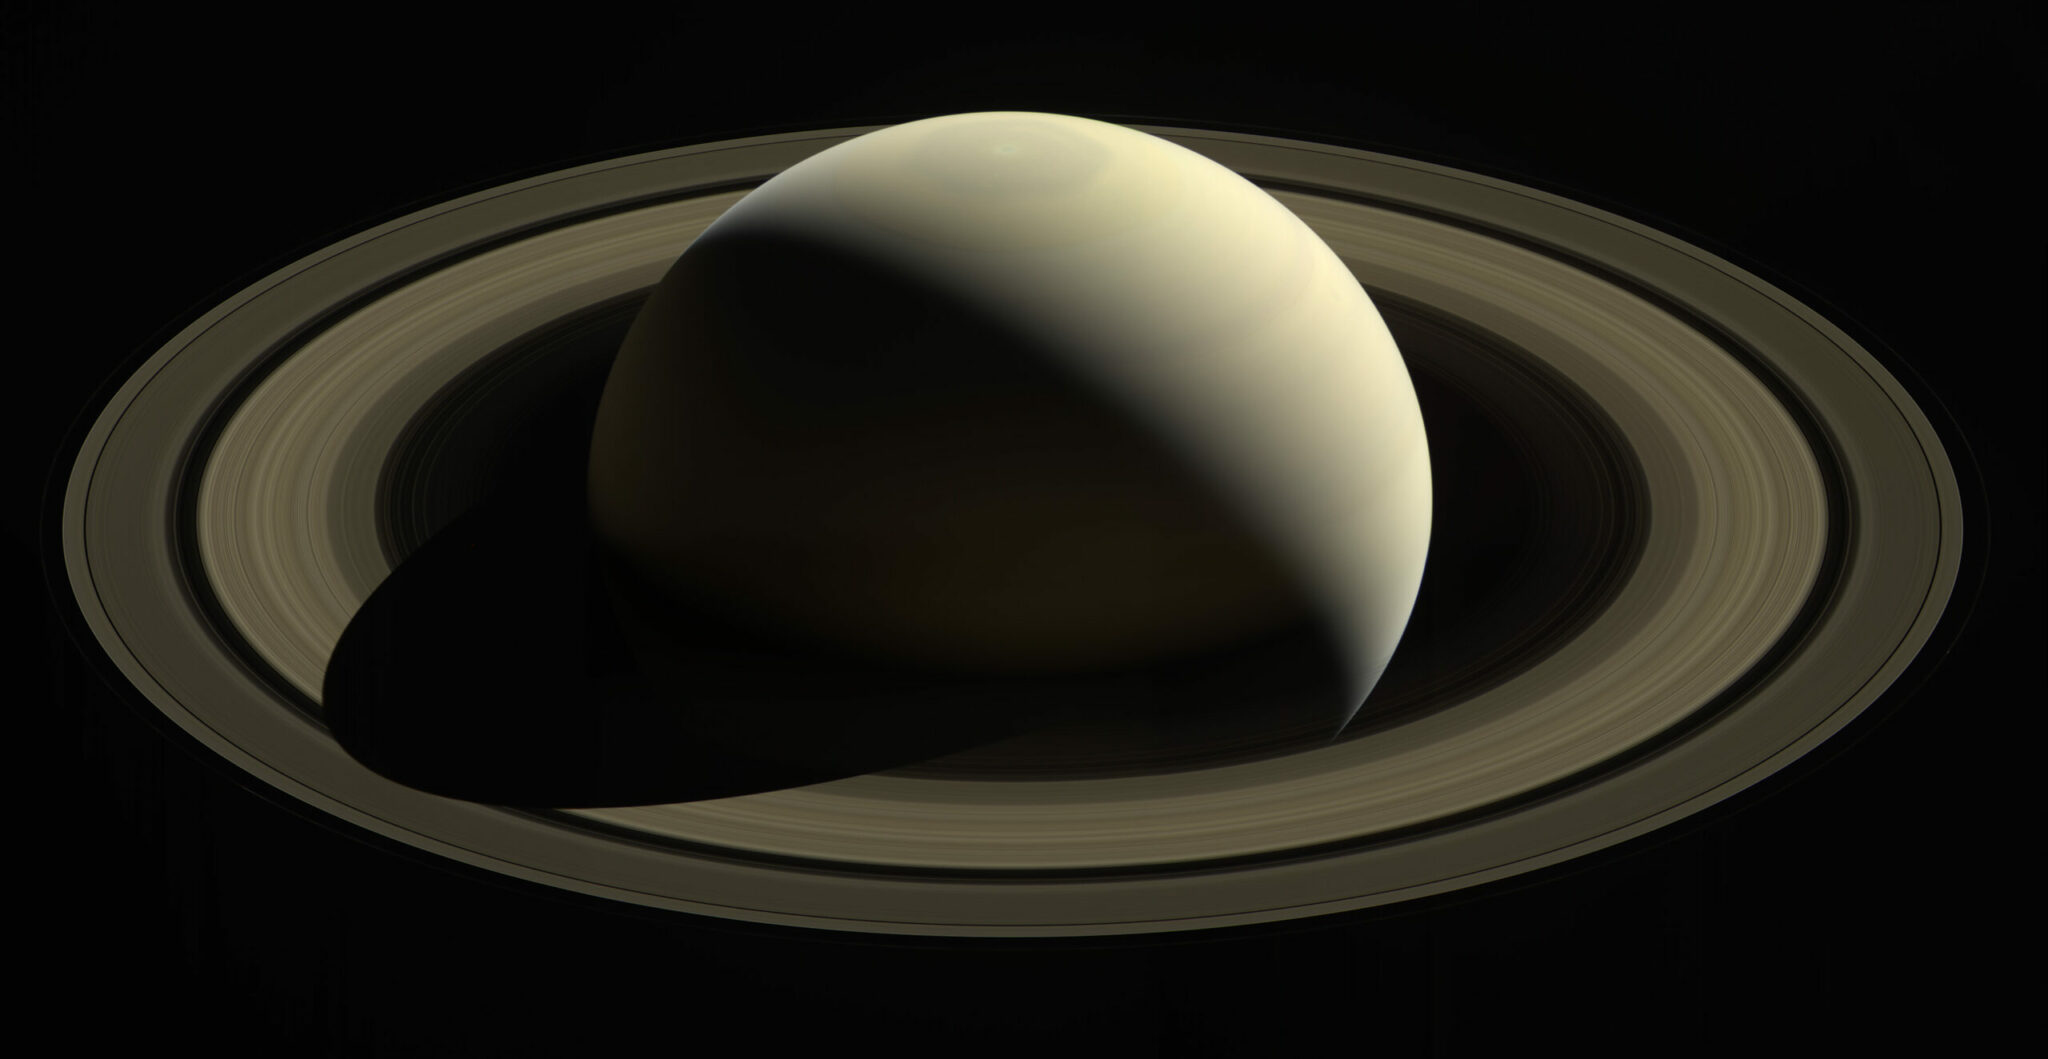 what is saturn made of and how is saturns composition of hydrogen and helium similar to the planet jupiter scaled